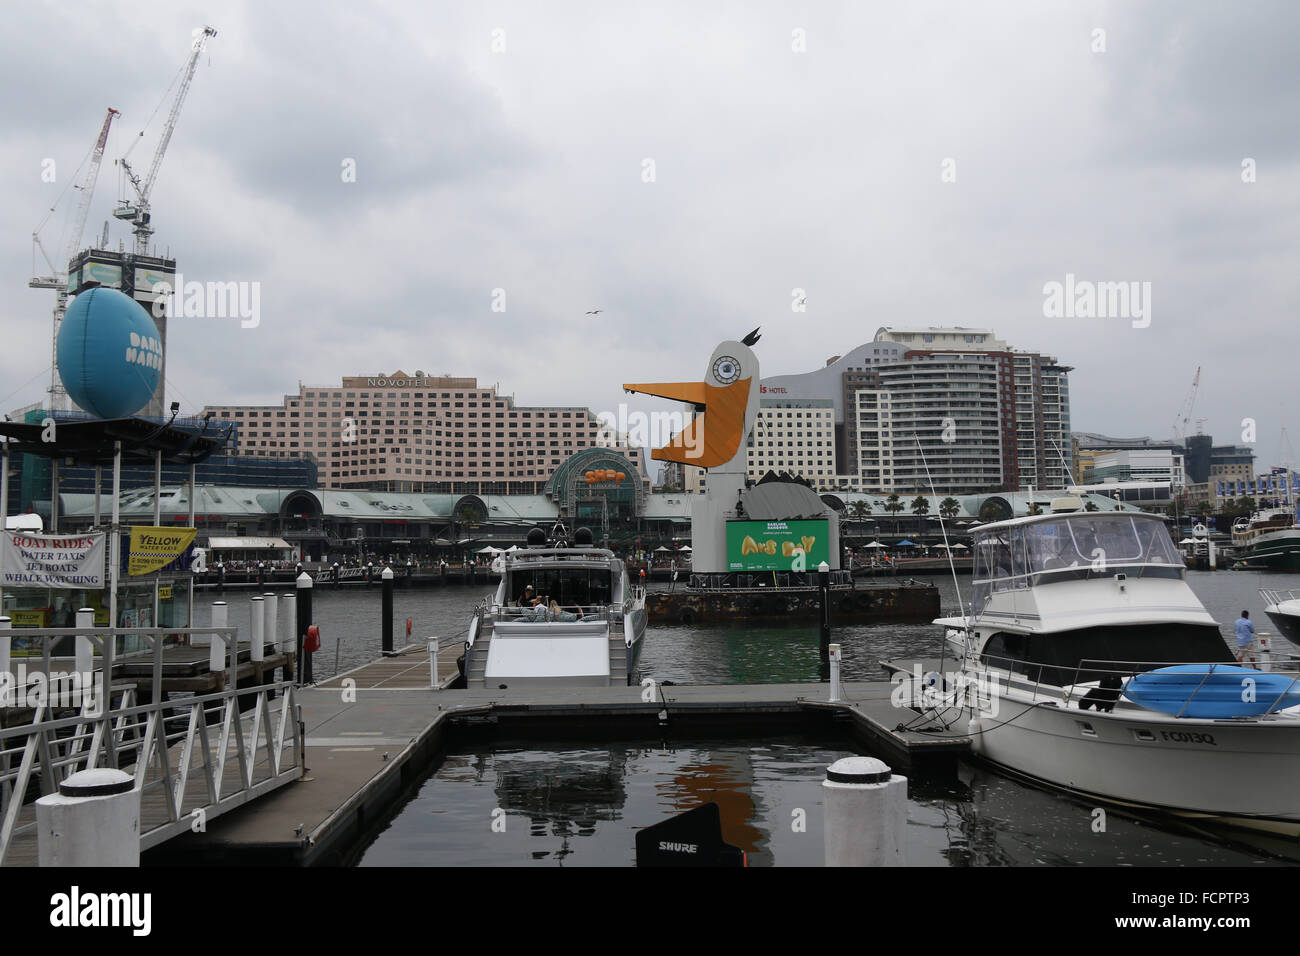 Ahead of the Australia Day celebrations in Darling Harbour, what appears to be some sort of giant white bird has appeared. Stock Photo